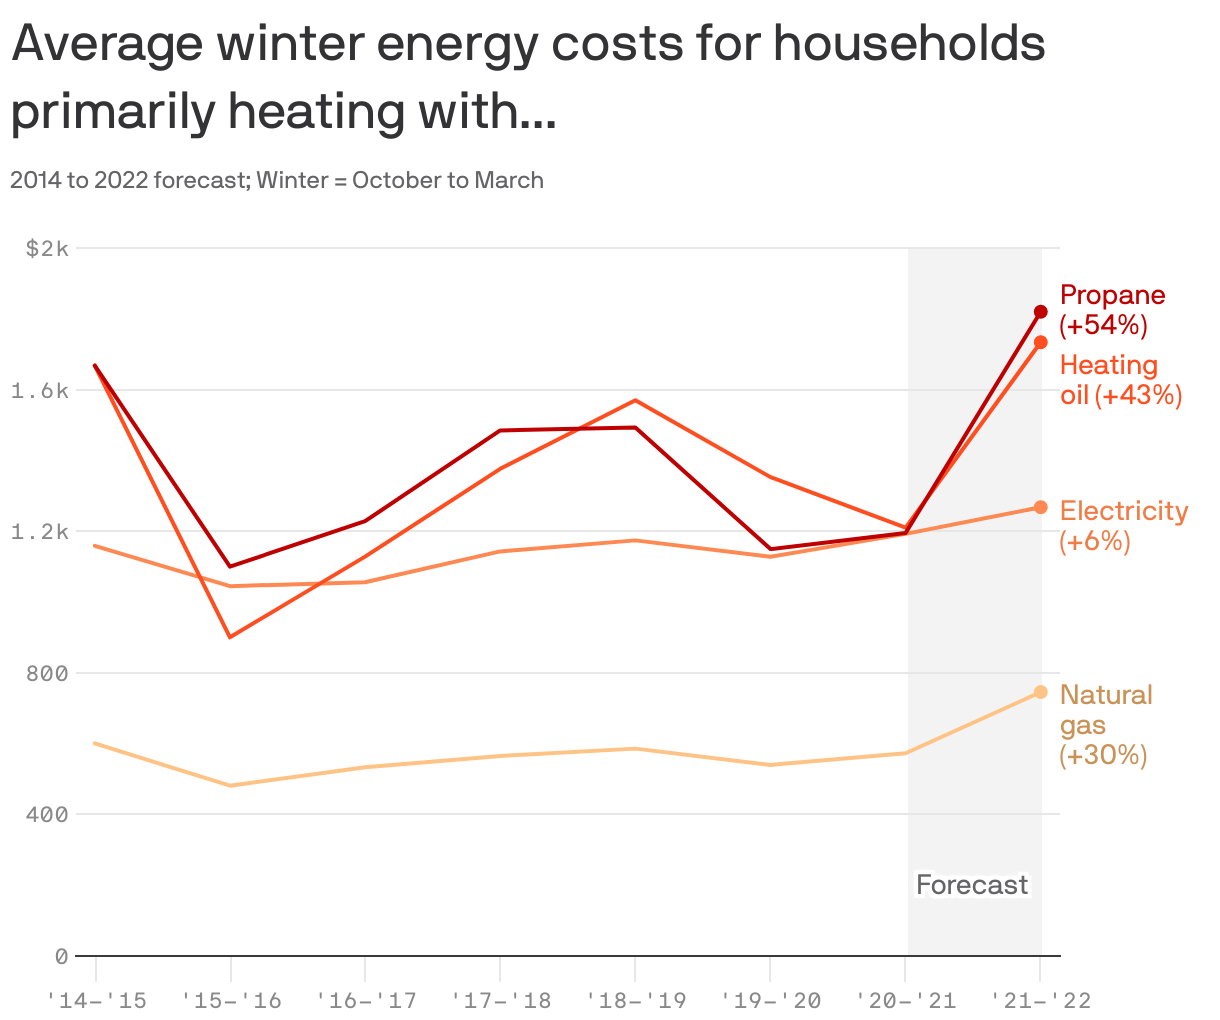 Average winter energy costs for households primarily heating with...